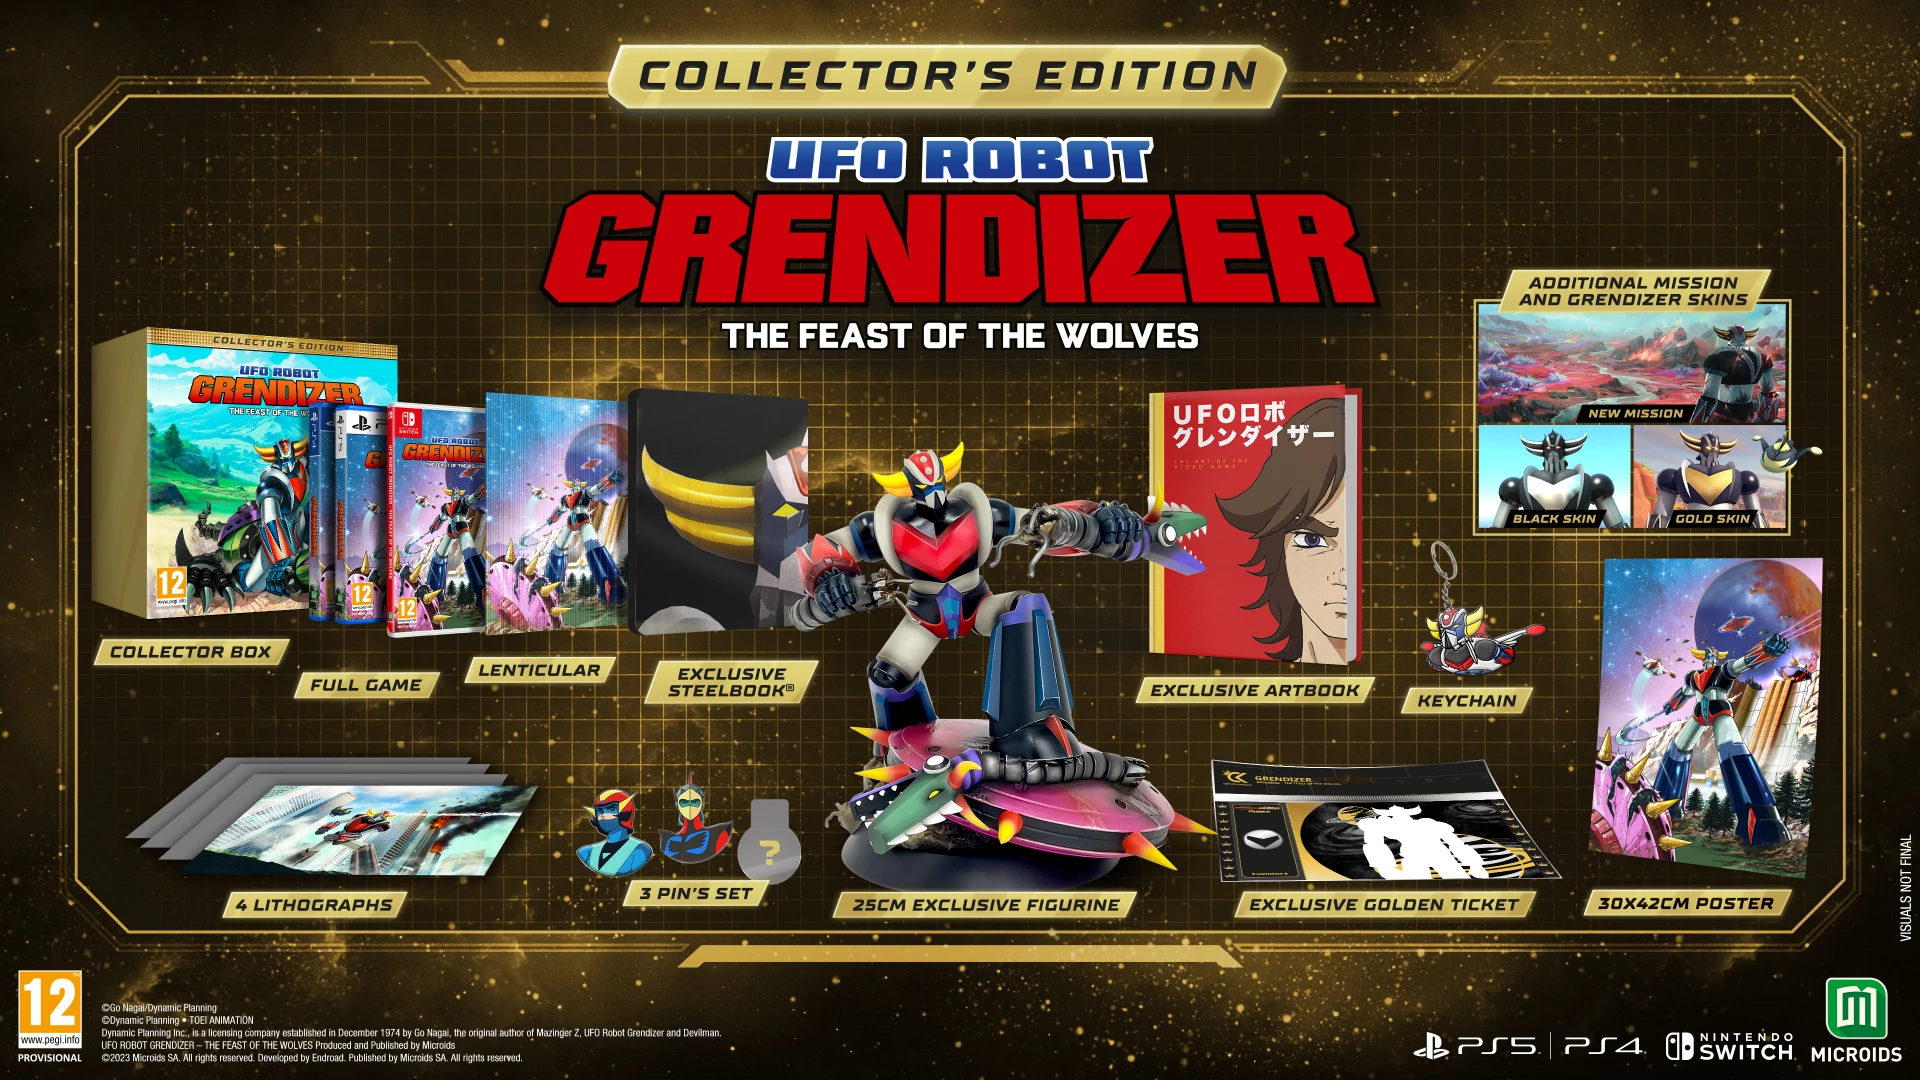 UFO Robot Grendizer: The Feast of the Wolves - Collector's Edition (Switch), Microids